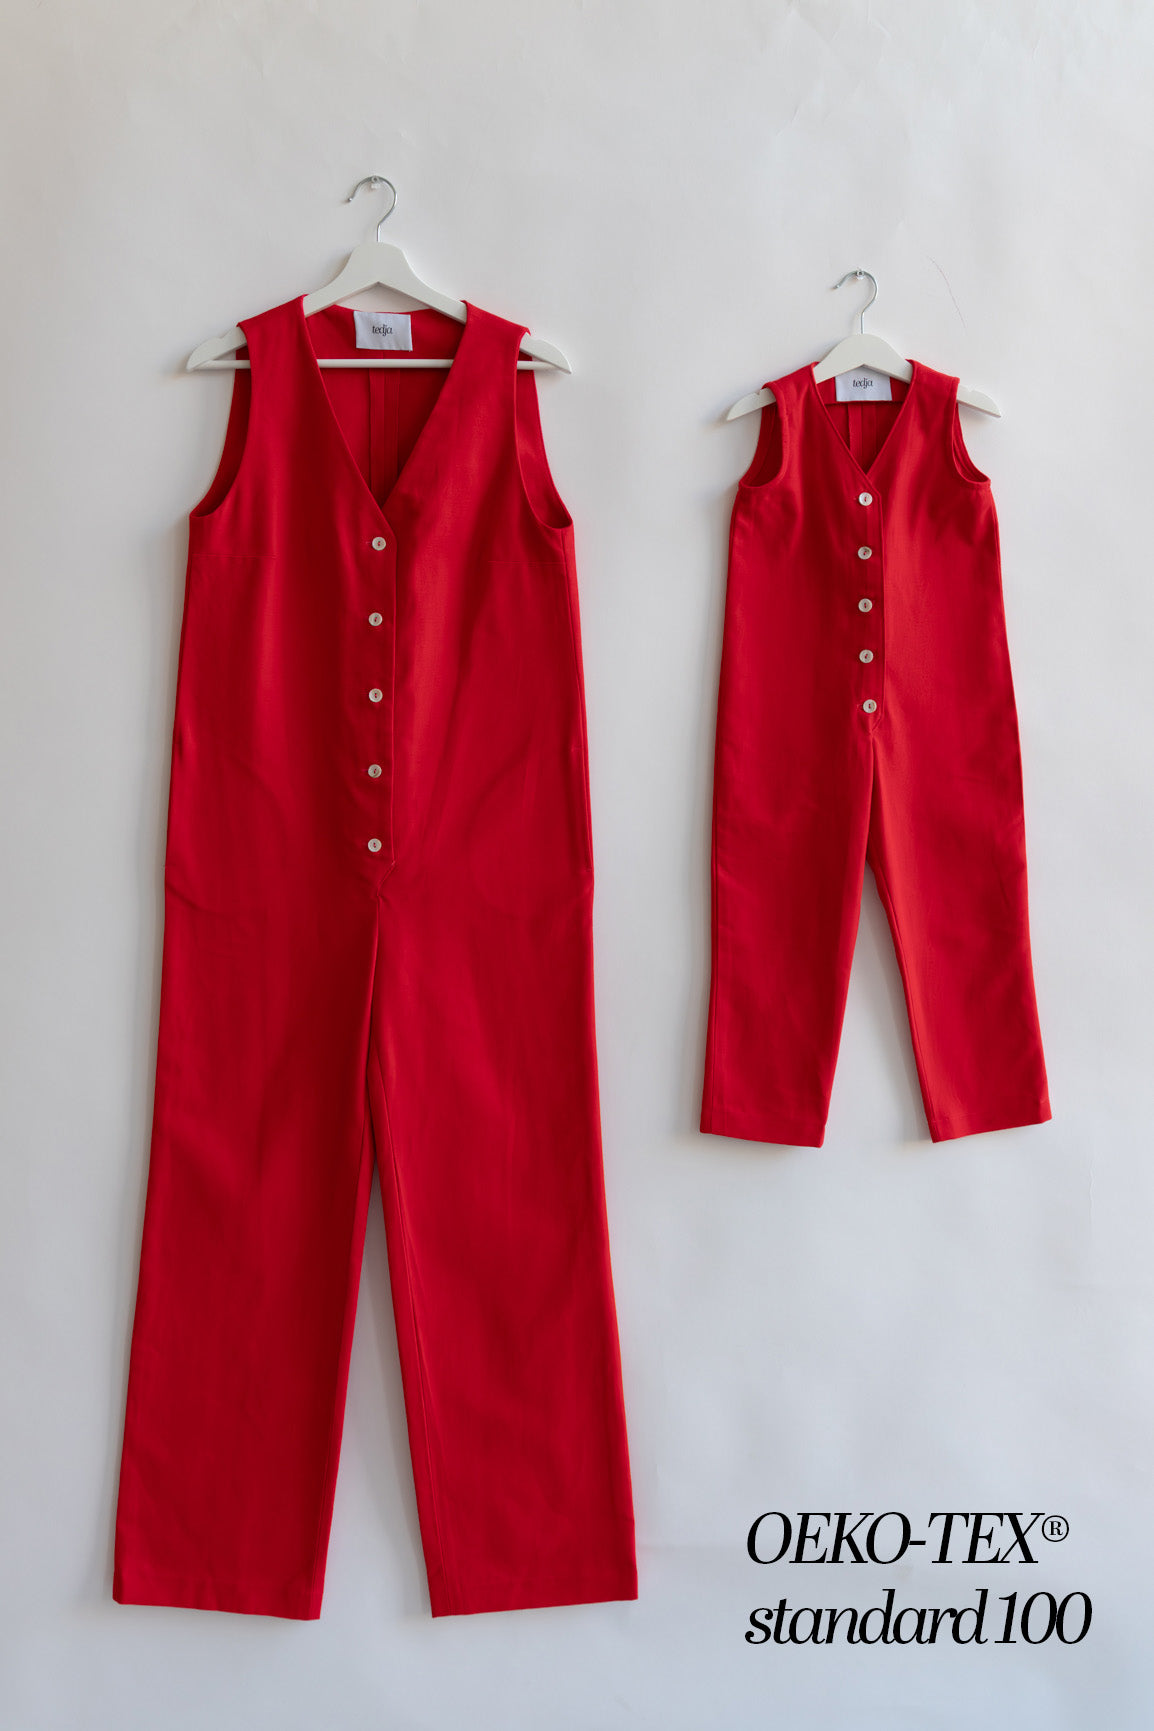 red color Jumpsuit overall workwear cotton canvas with pockets 5 buttons v-neck tall girls short girls oeko-tex sustainable clothes handmade